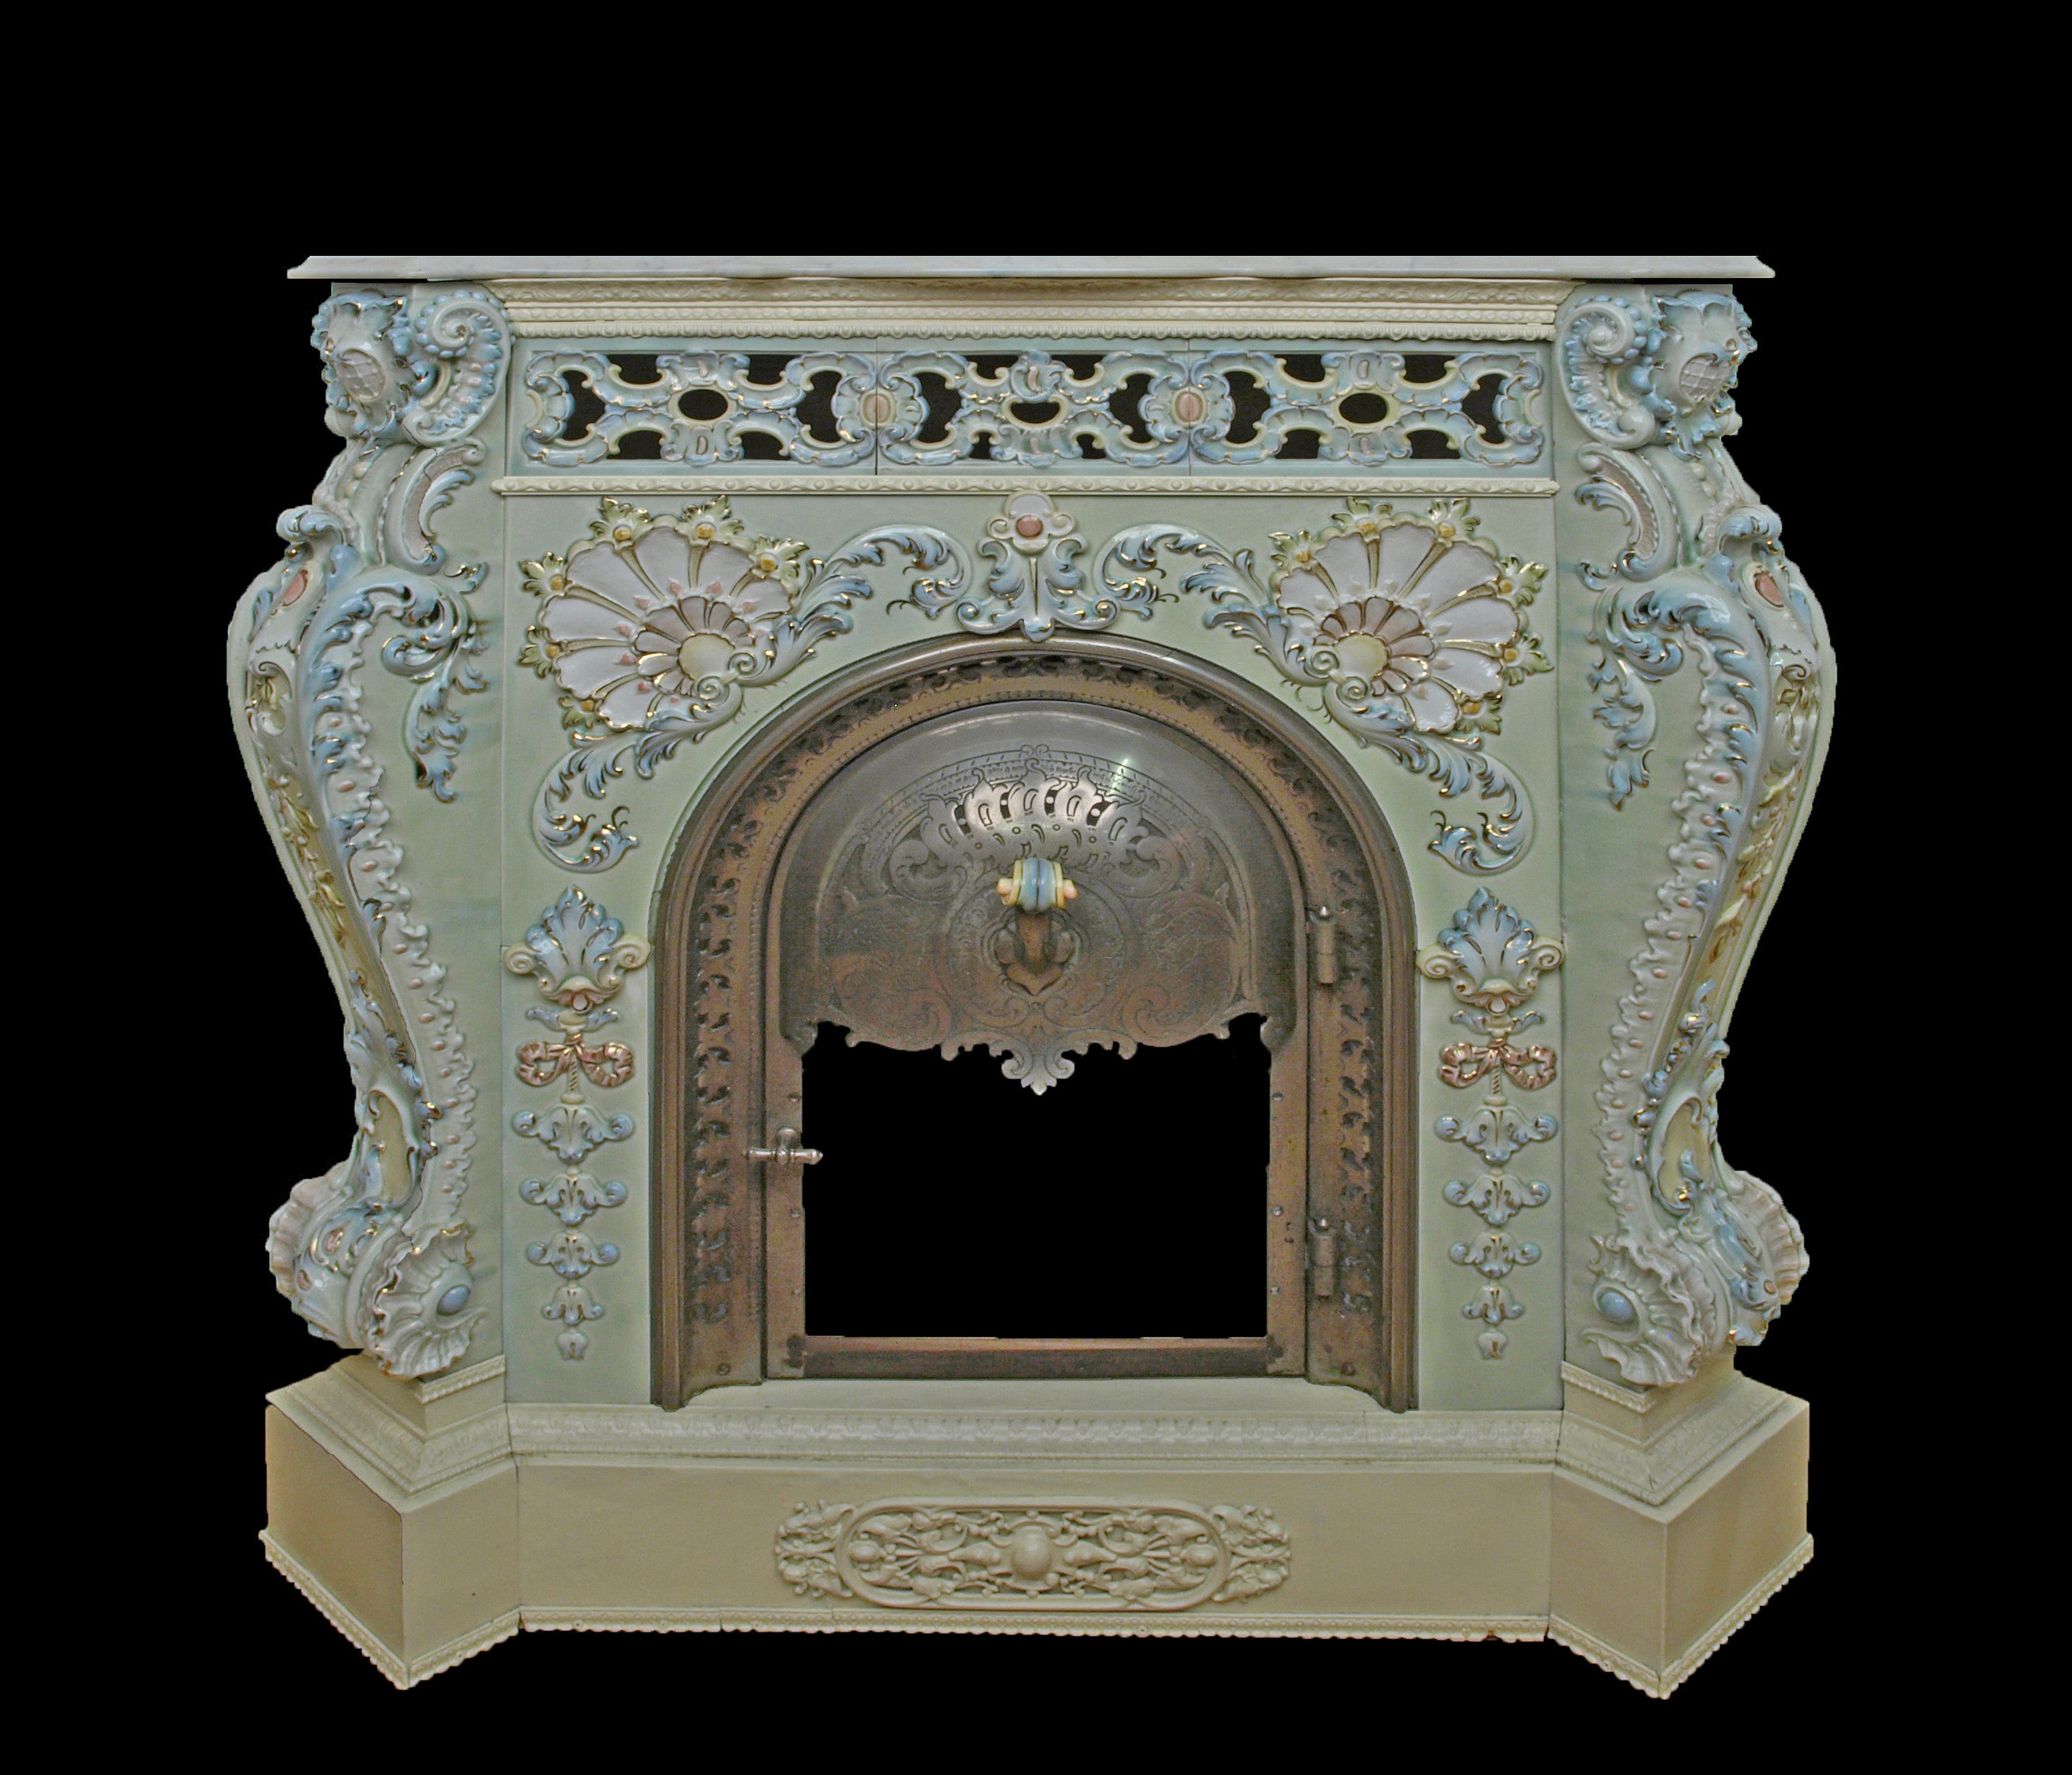 Villeroy & Boch Ceramic Porcelain Fireplace with a Marble Top